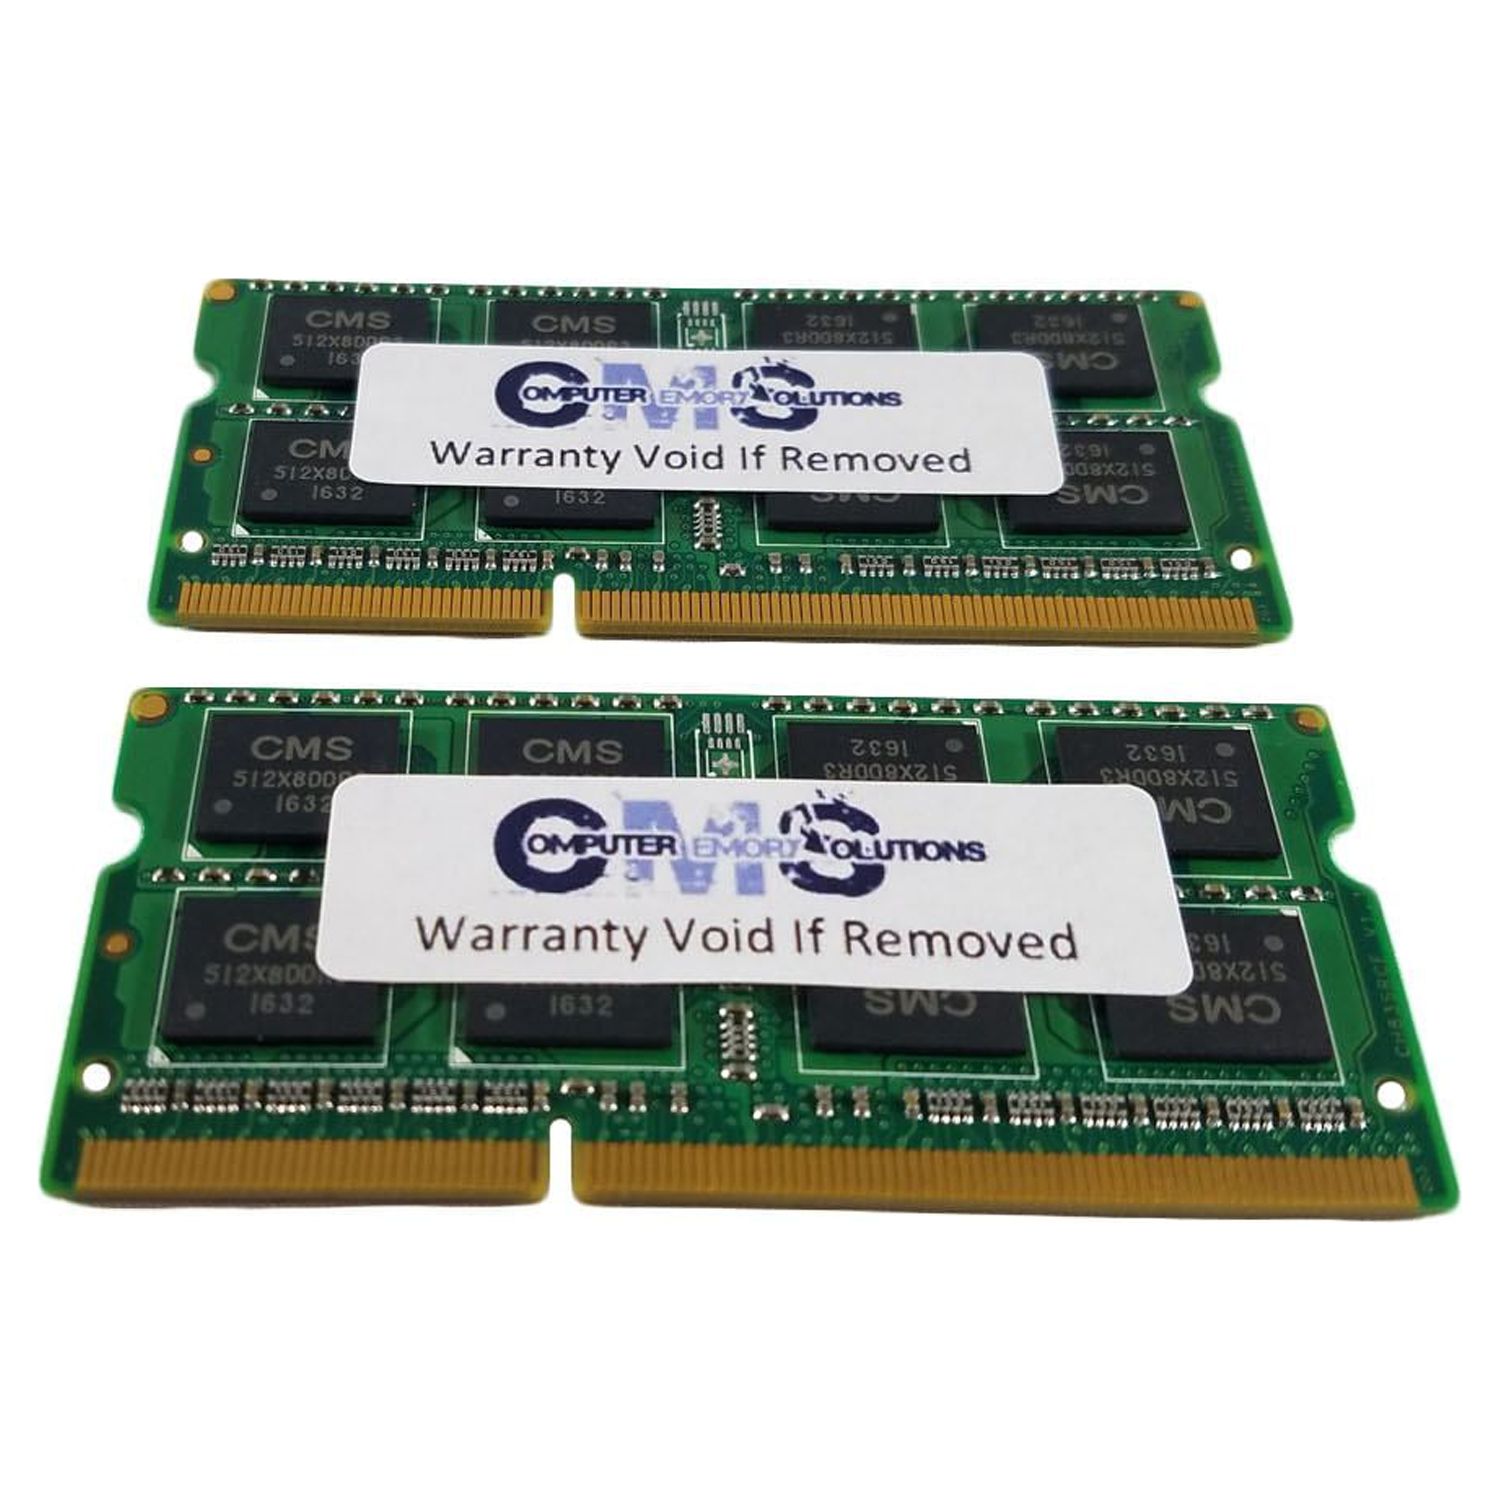 CMS 8GB (2X4GB) DDR3 8500 1066MHZ NON ECC SODIMM Memory Ram Upgrade Compatible with Apple® Imac "Core 2 Duo" 3.06 21.5-Inch (Late 2009) - A35 - image 2 of 2